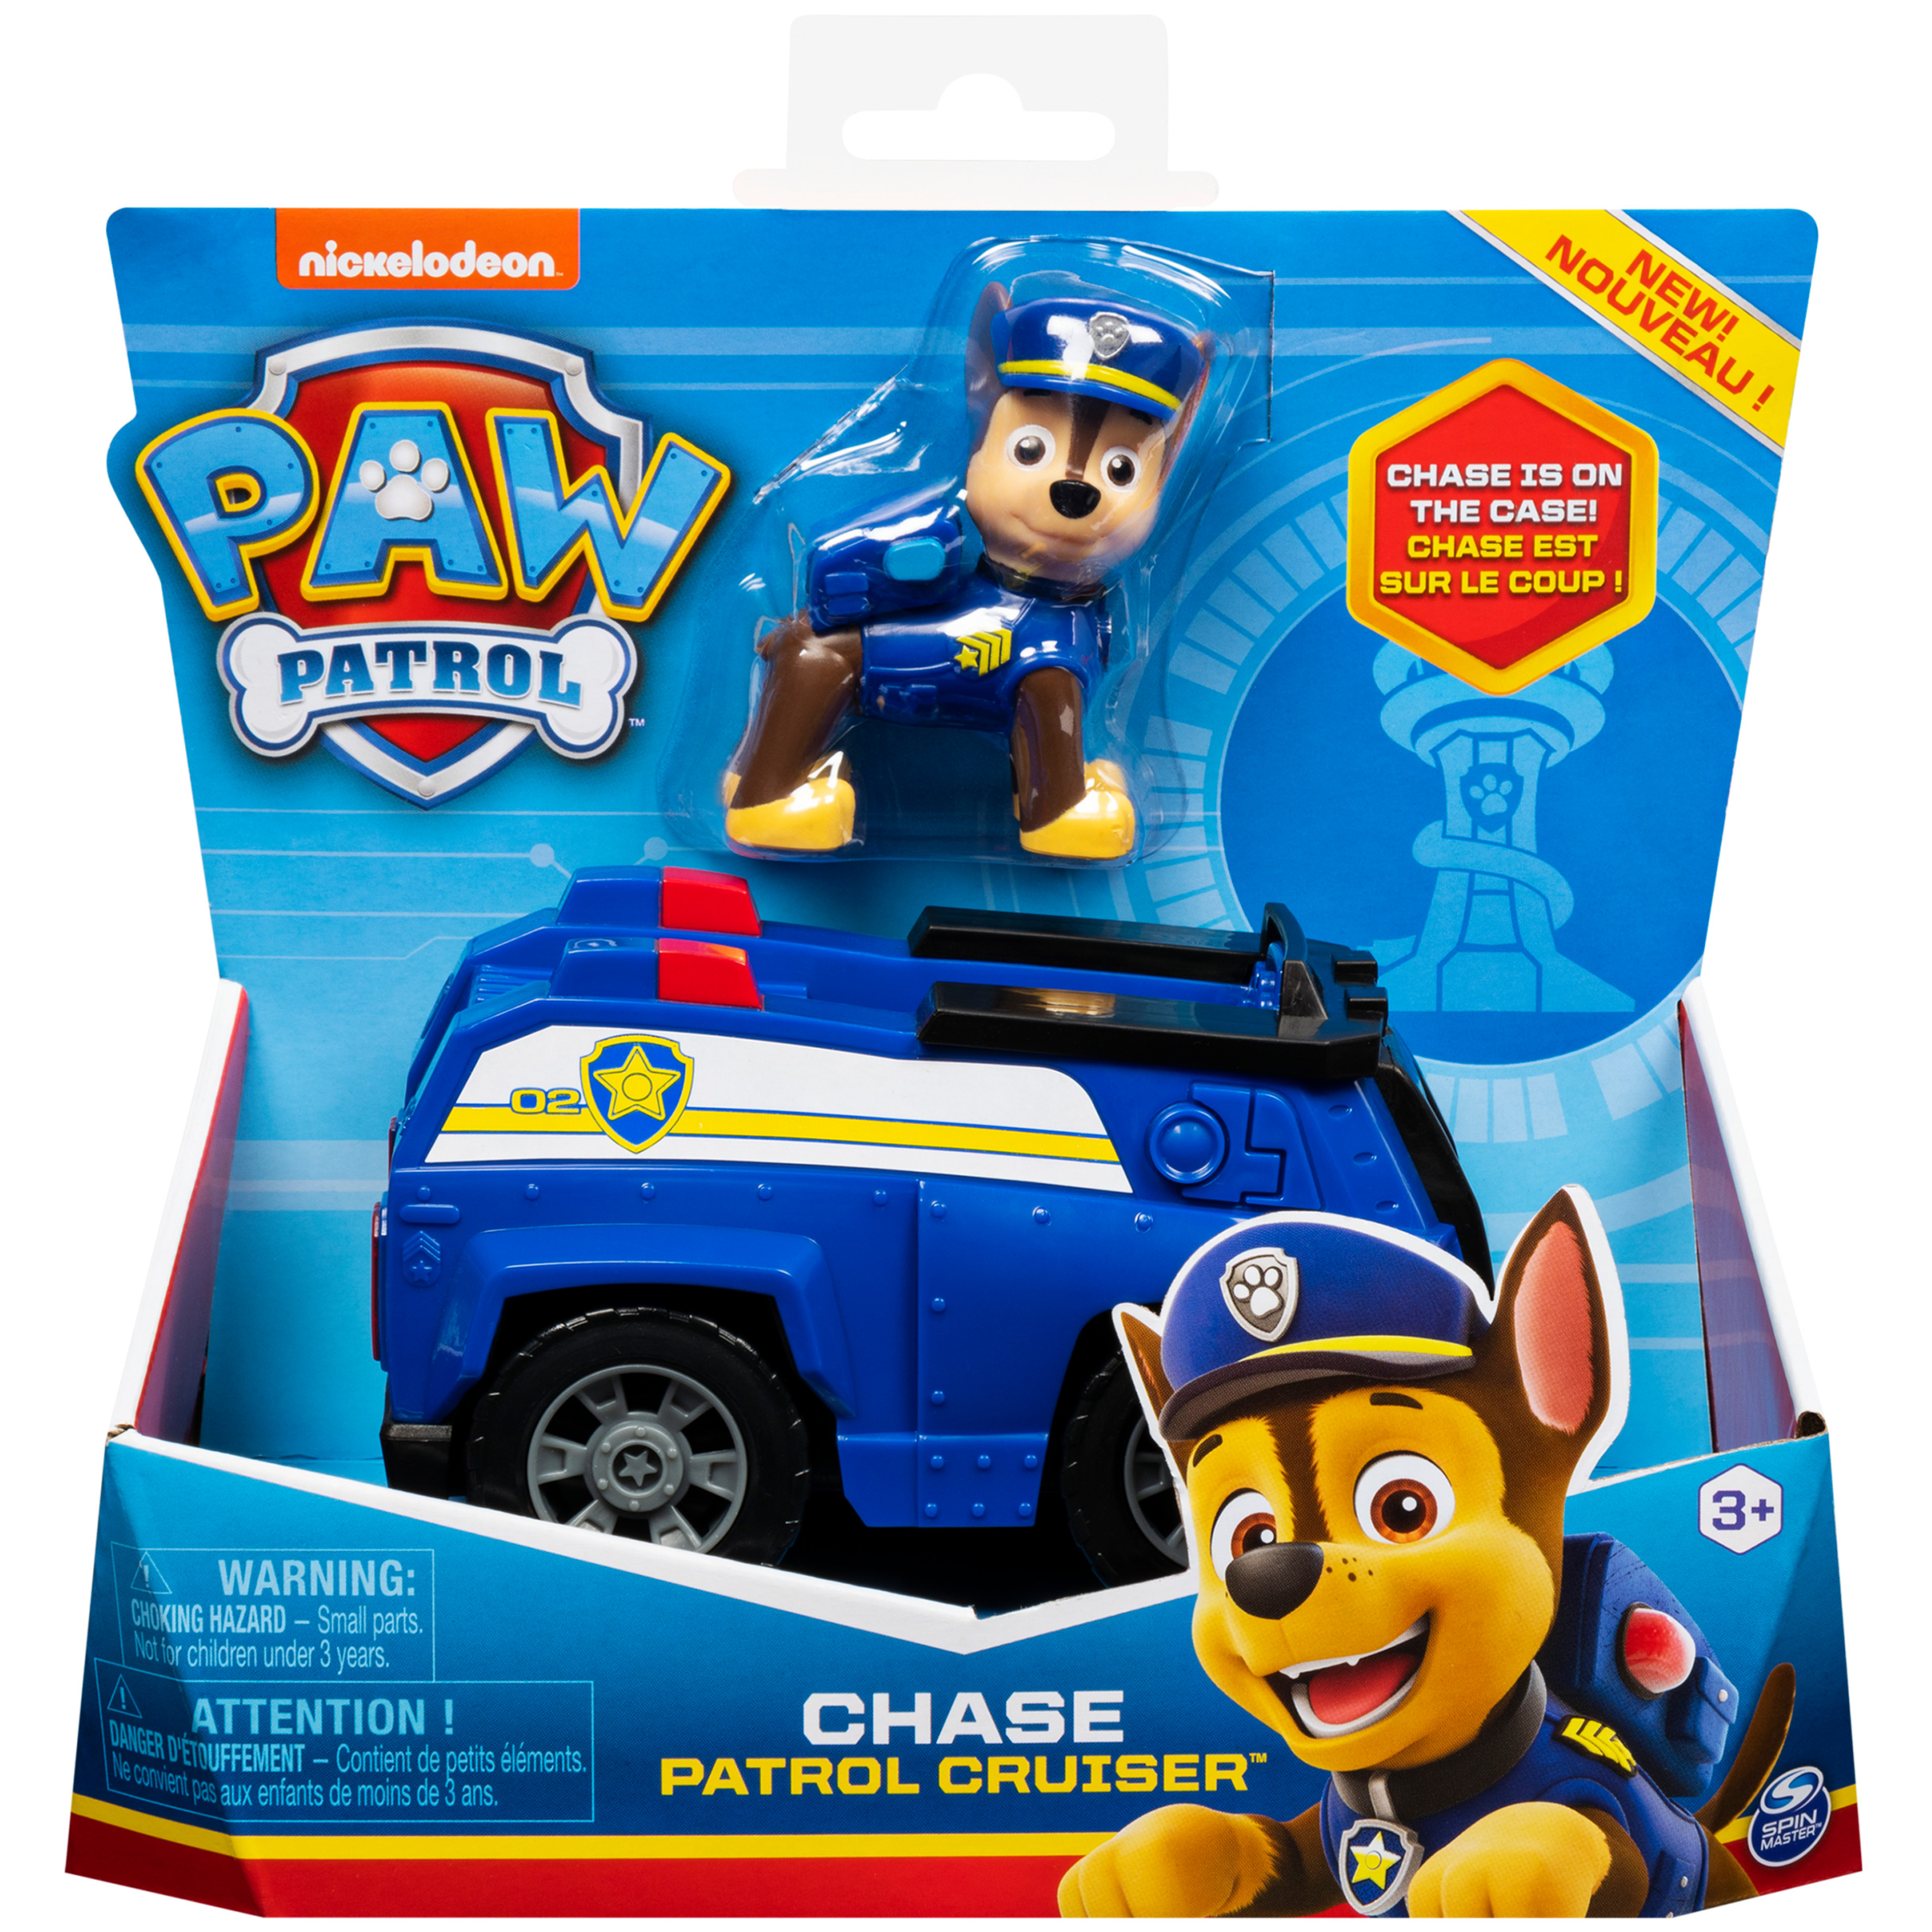 PAW Patrol, Chase’s Patrol Cruiser Vehicle with Collectible Figure - image 2 of 5